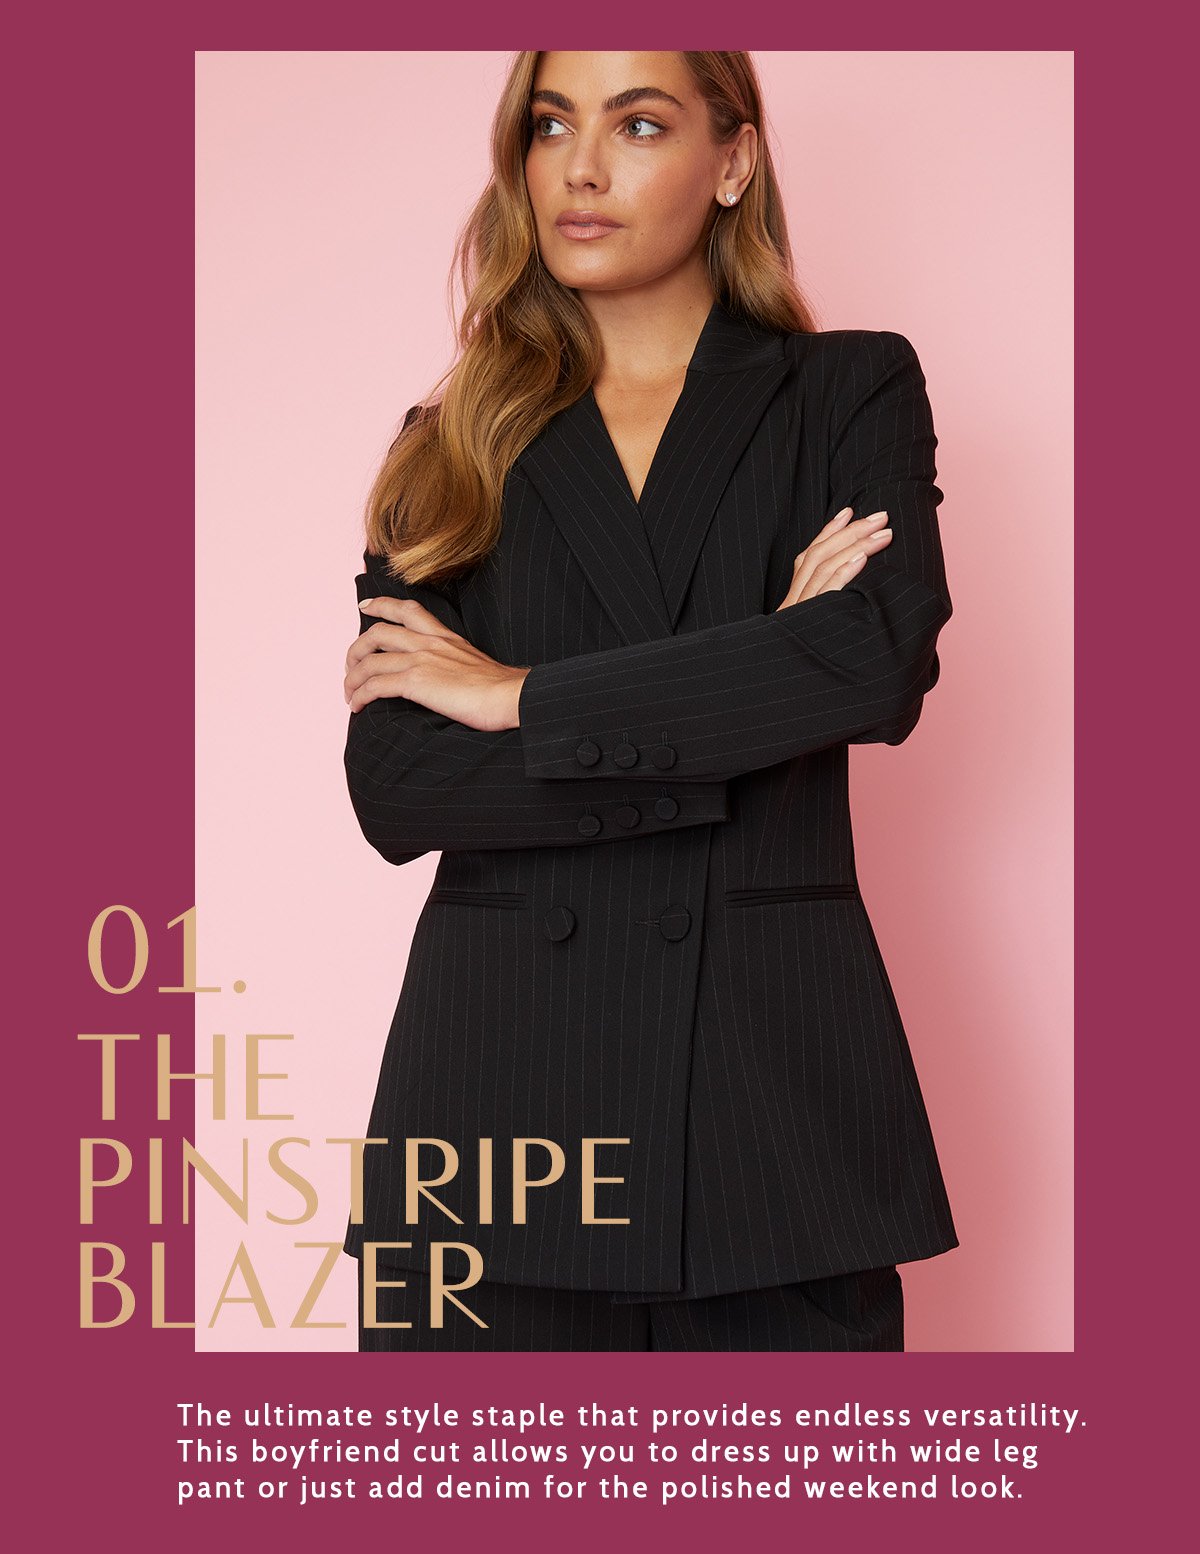 The Pinstripe Blazer. The ultimate style staple that provides endless versatility. This boyfriend cut allows you to dress up with wide leg pant or just add denim for the polished weekend look.